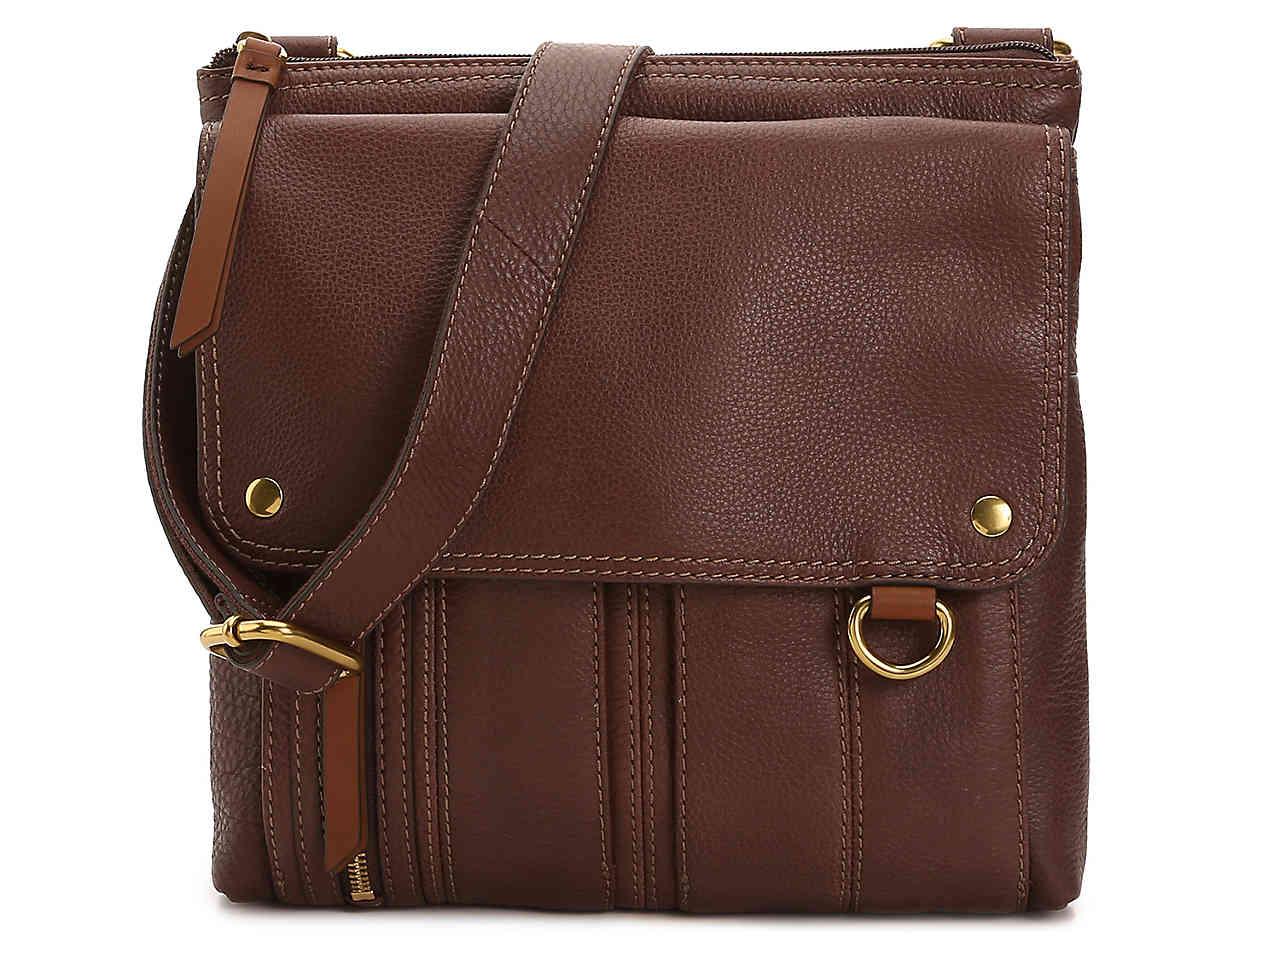 Fossil Morgan Leather Crossbody Bag in Brown - Lyst